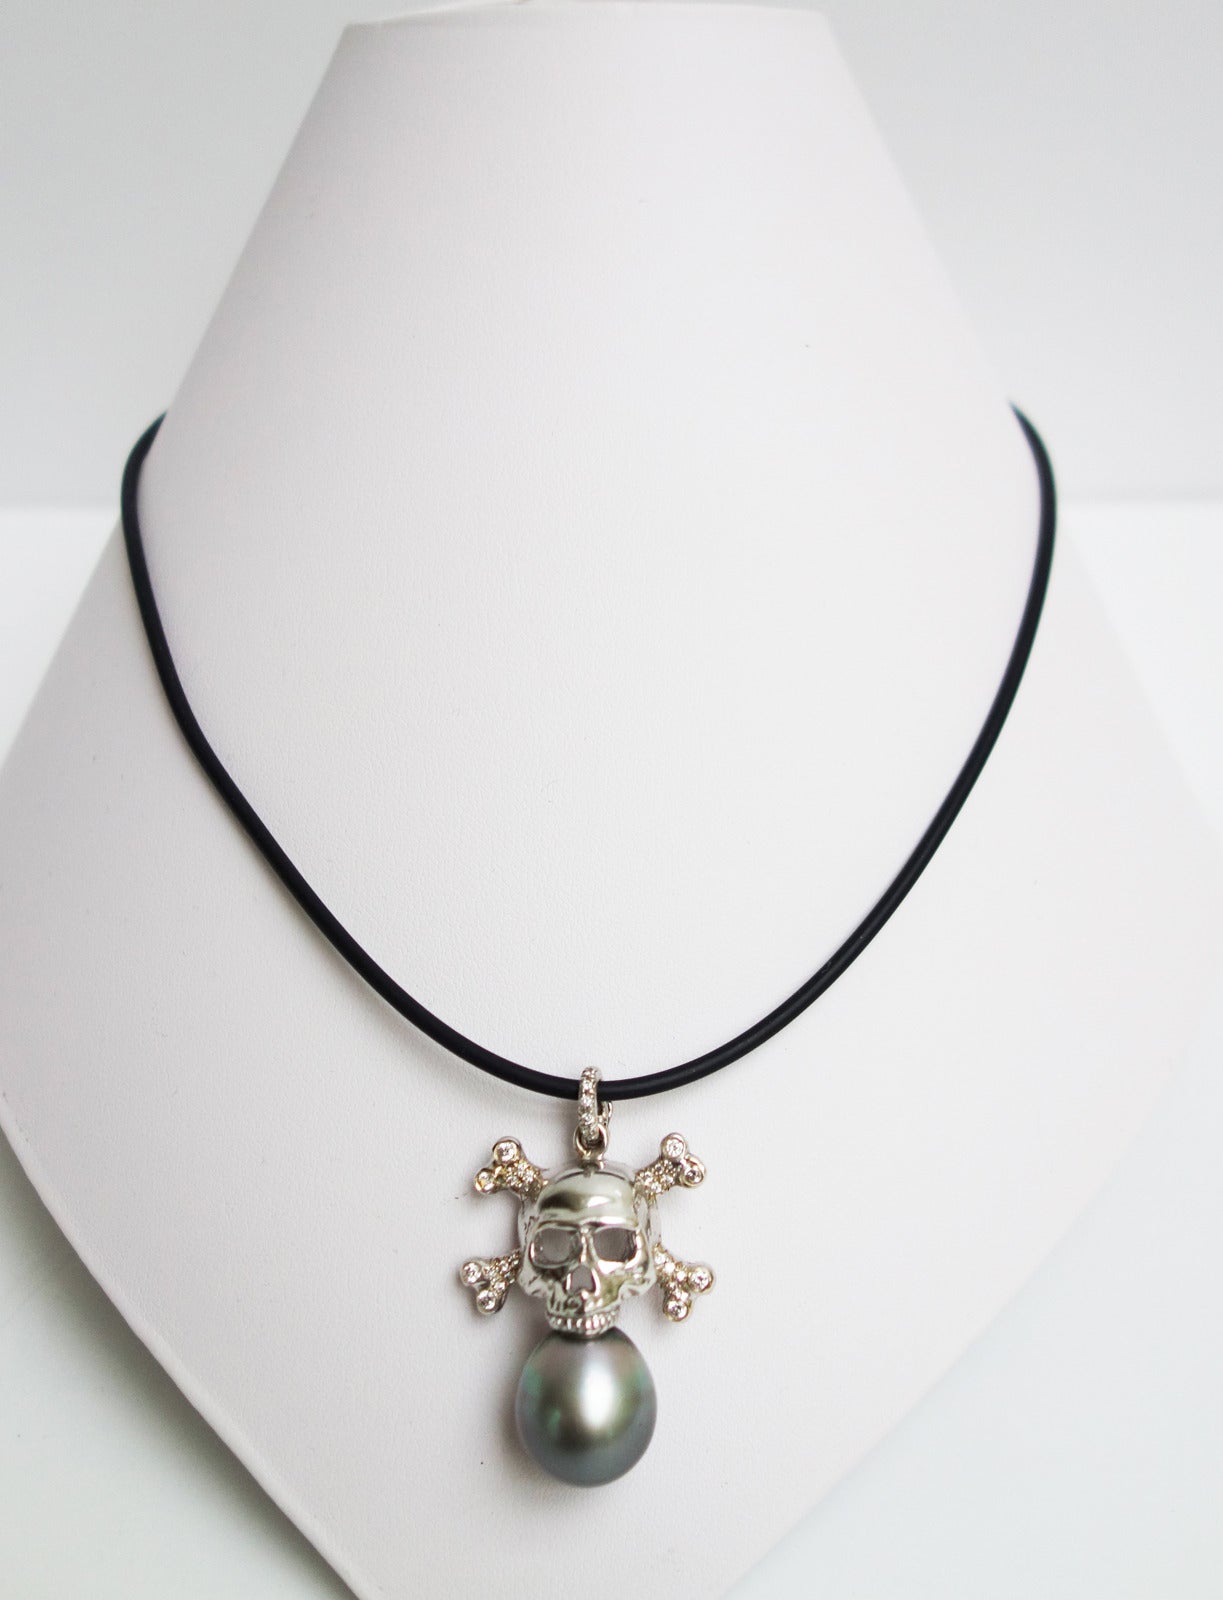 Featuring a 14mm cultured black Tahitian pearl supported by an 18K white gold diamond set skull pendant enhancer. Stamped 18K EC. Can be worn on a gold chain, leather cord or pearl strand.